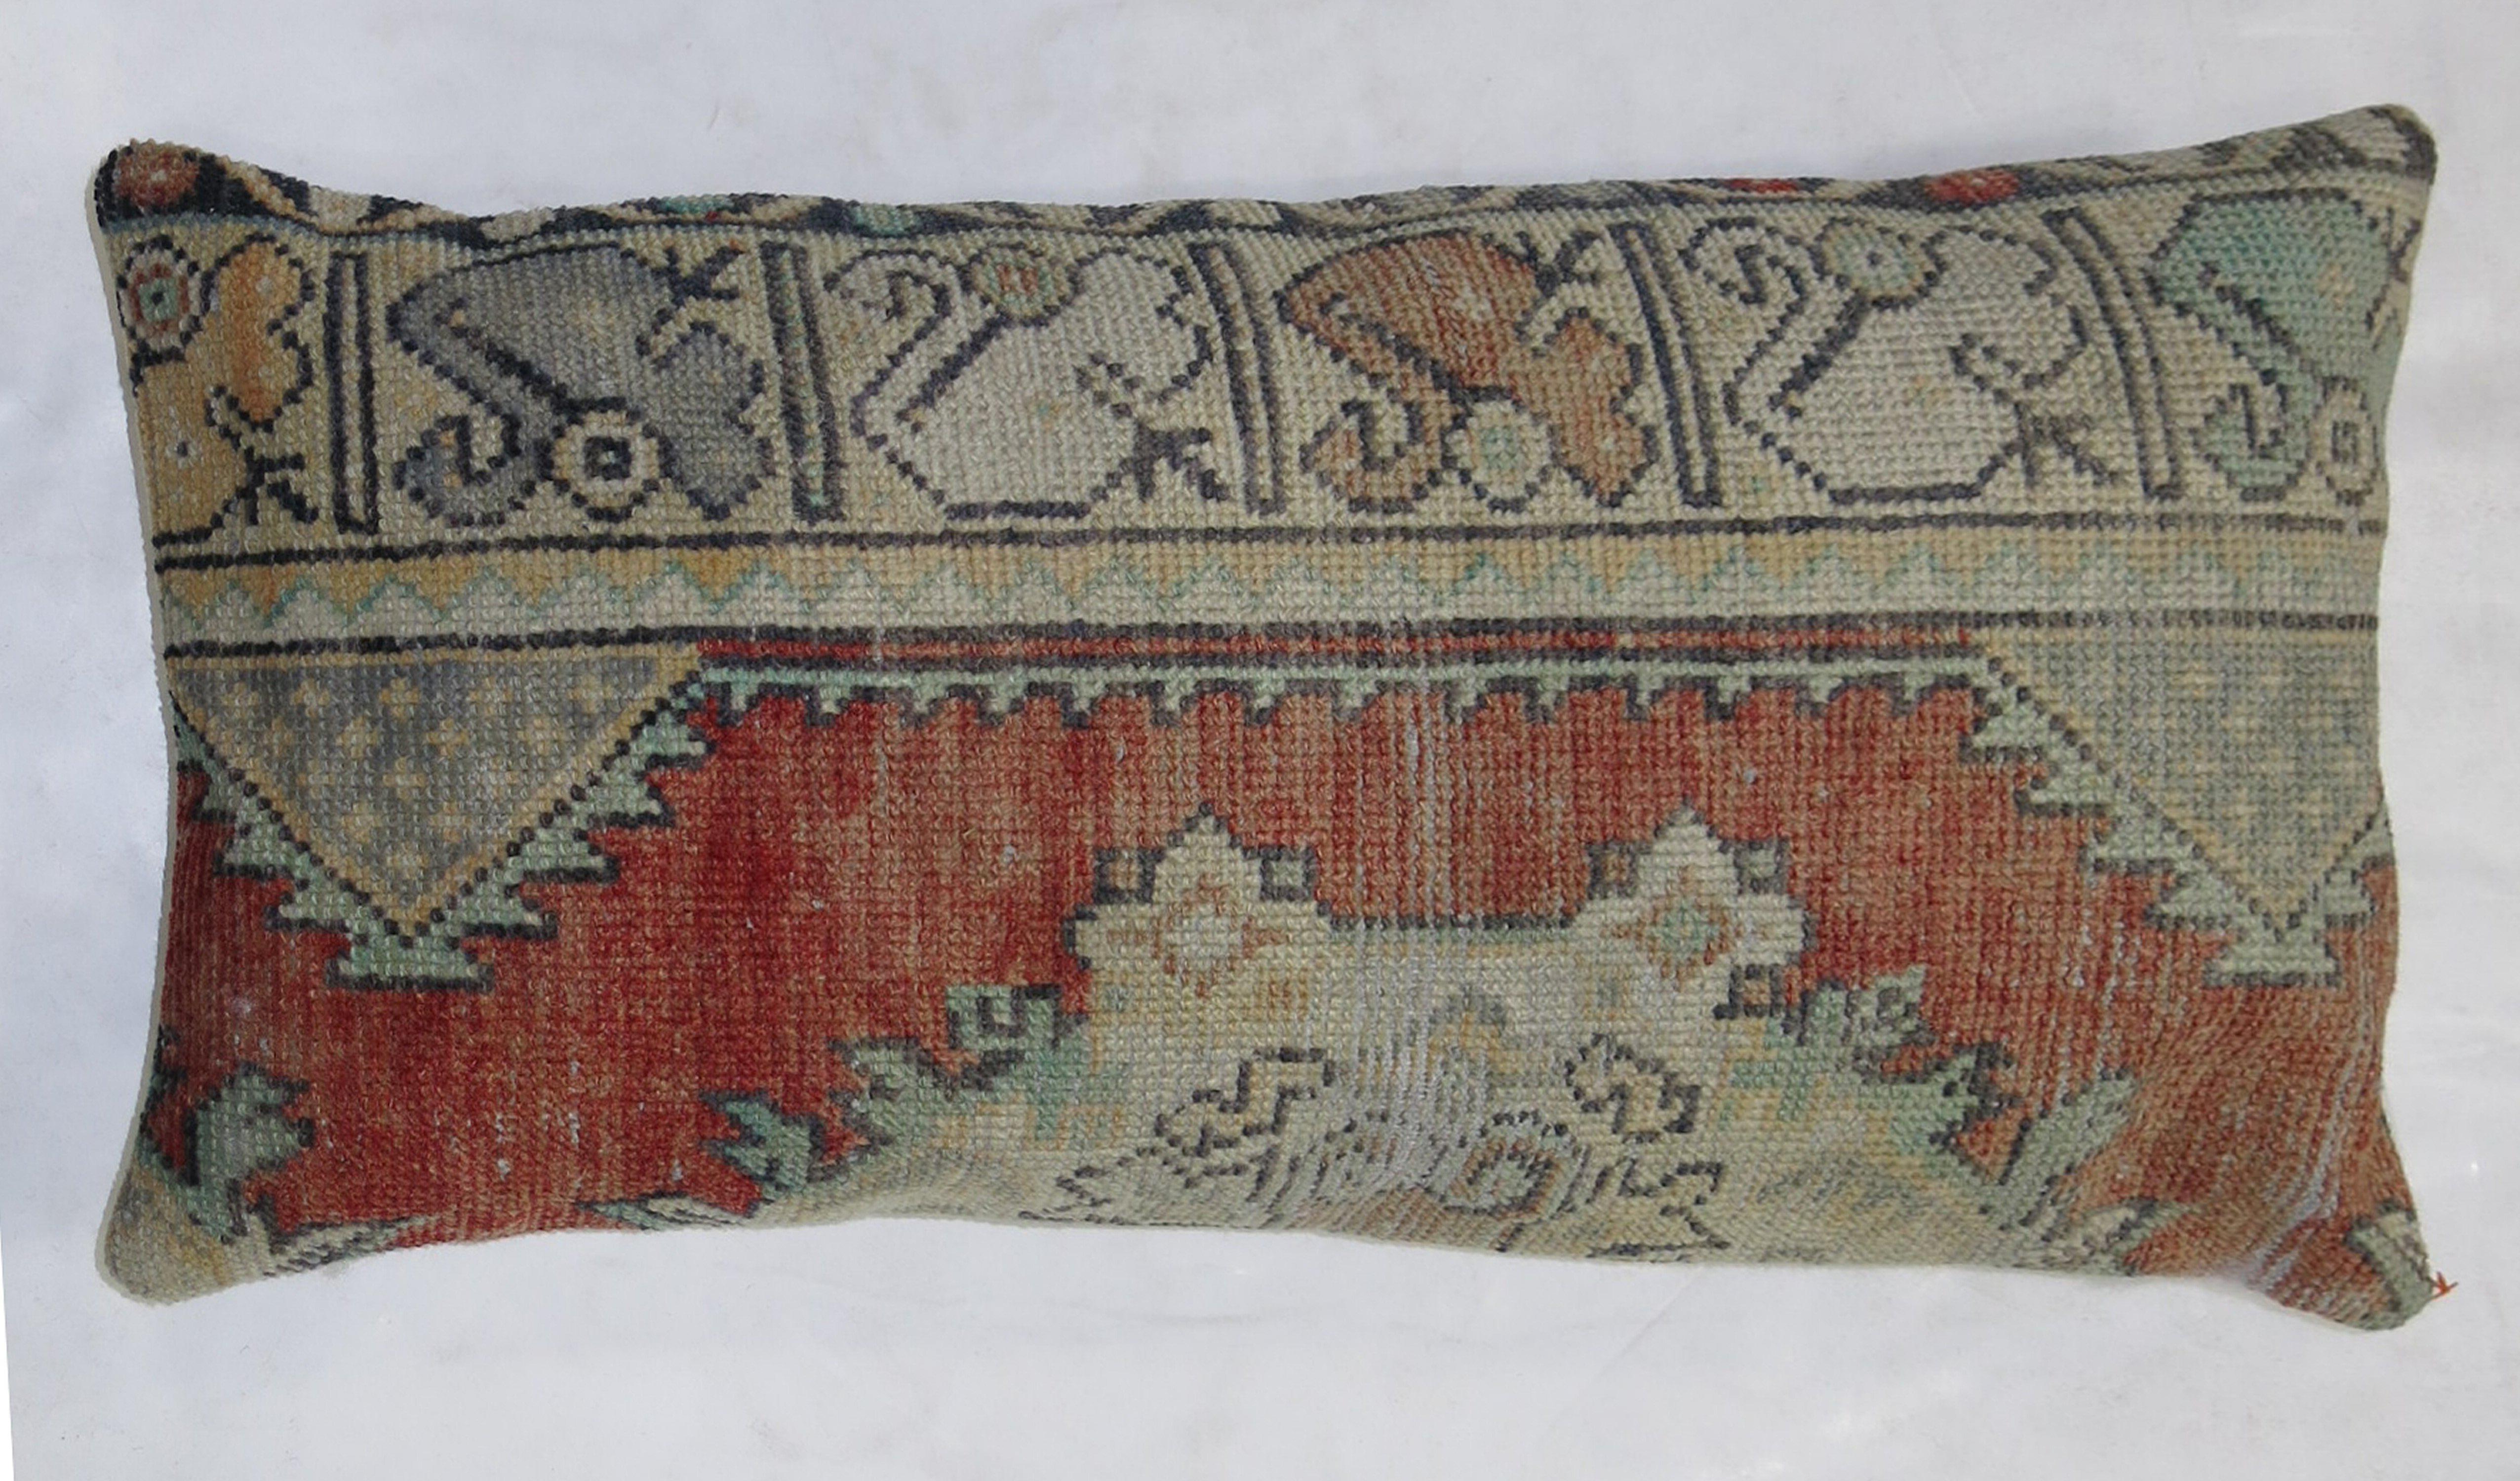 Large Pillow Made from a turkish anatolian Rug

Size: 15'' x 28''.